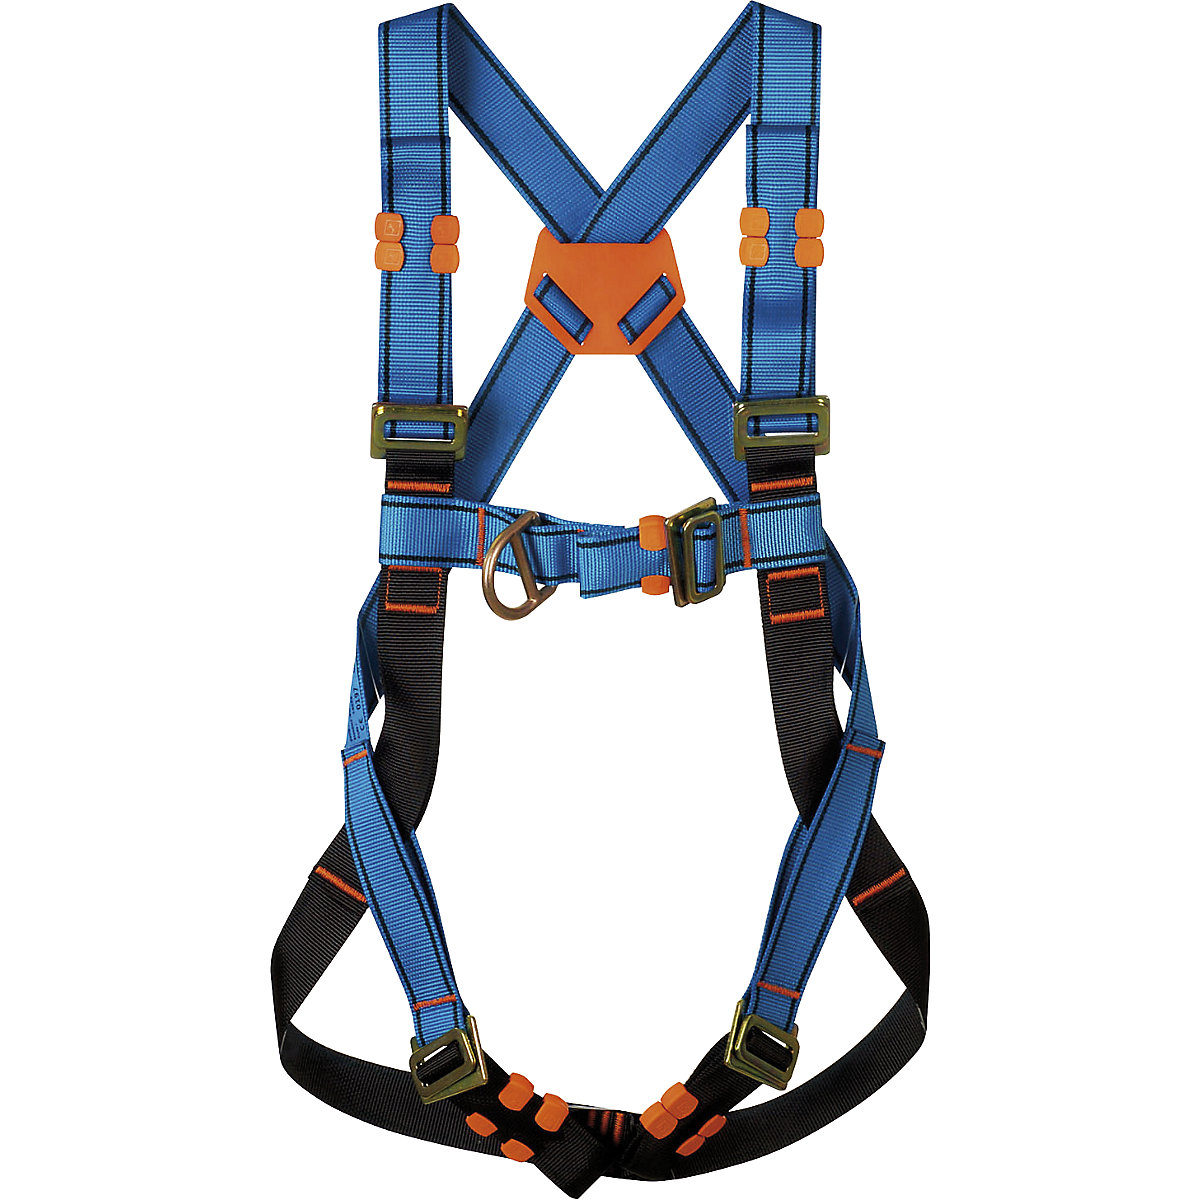 HT 22 safety harness: with back anchorage, chest anchorage point